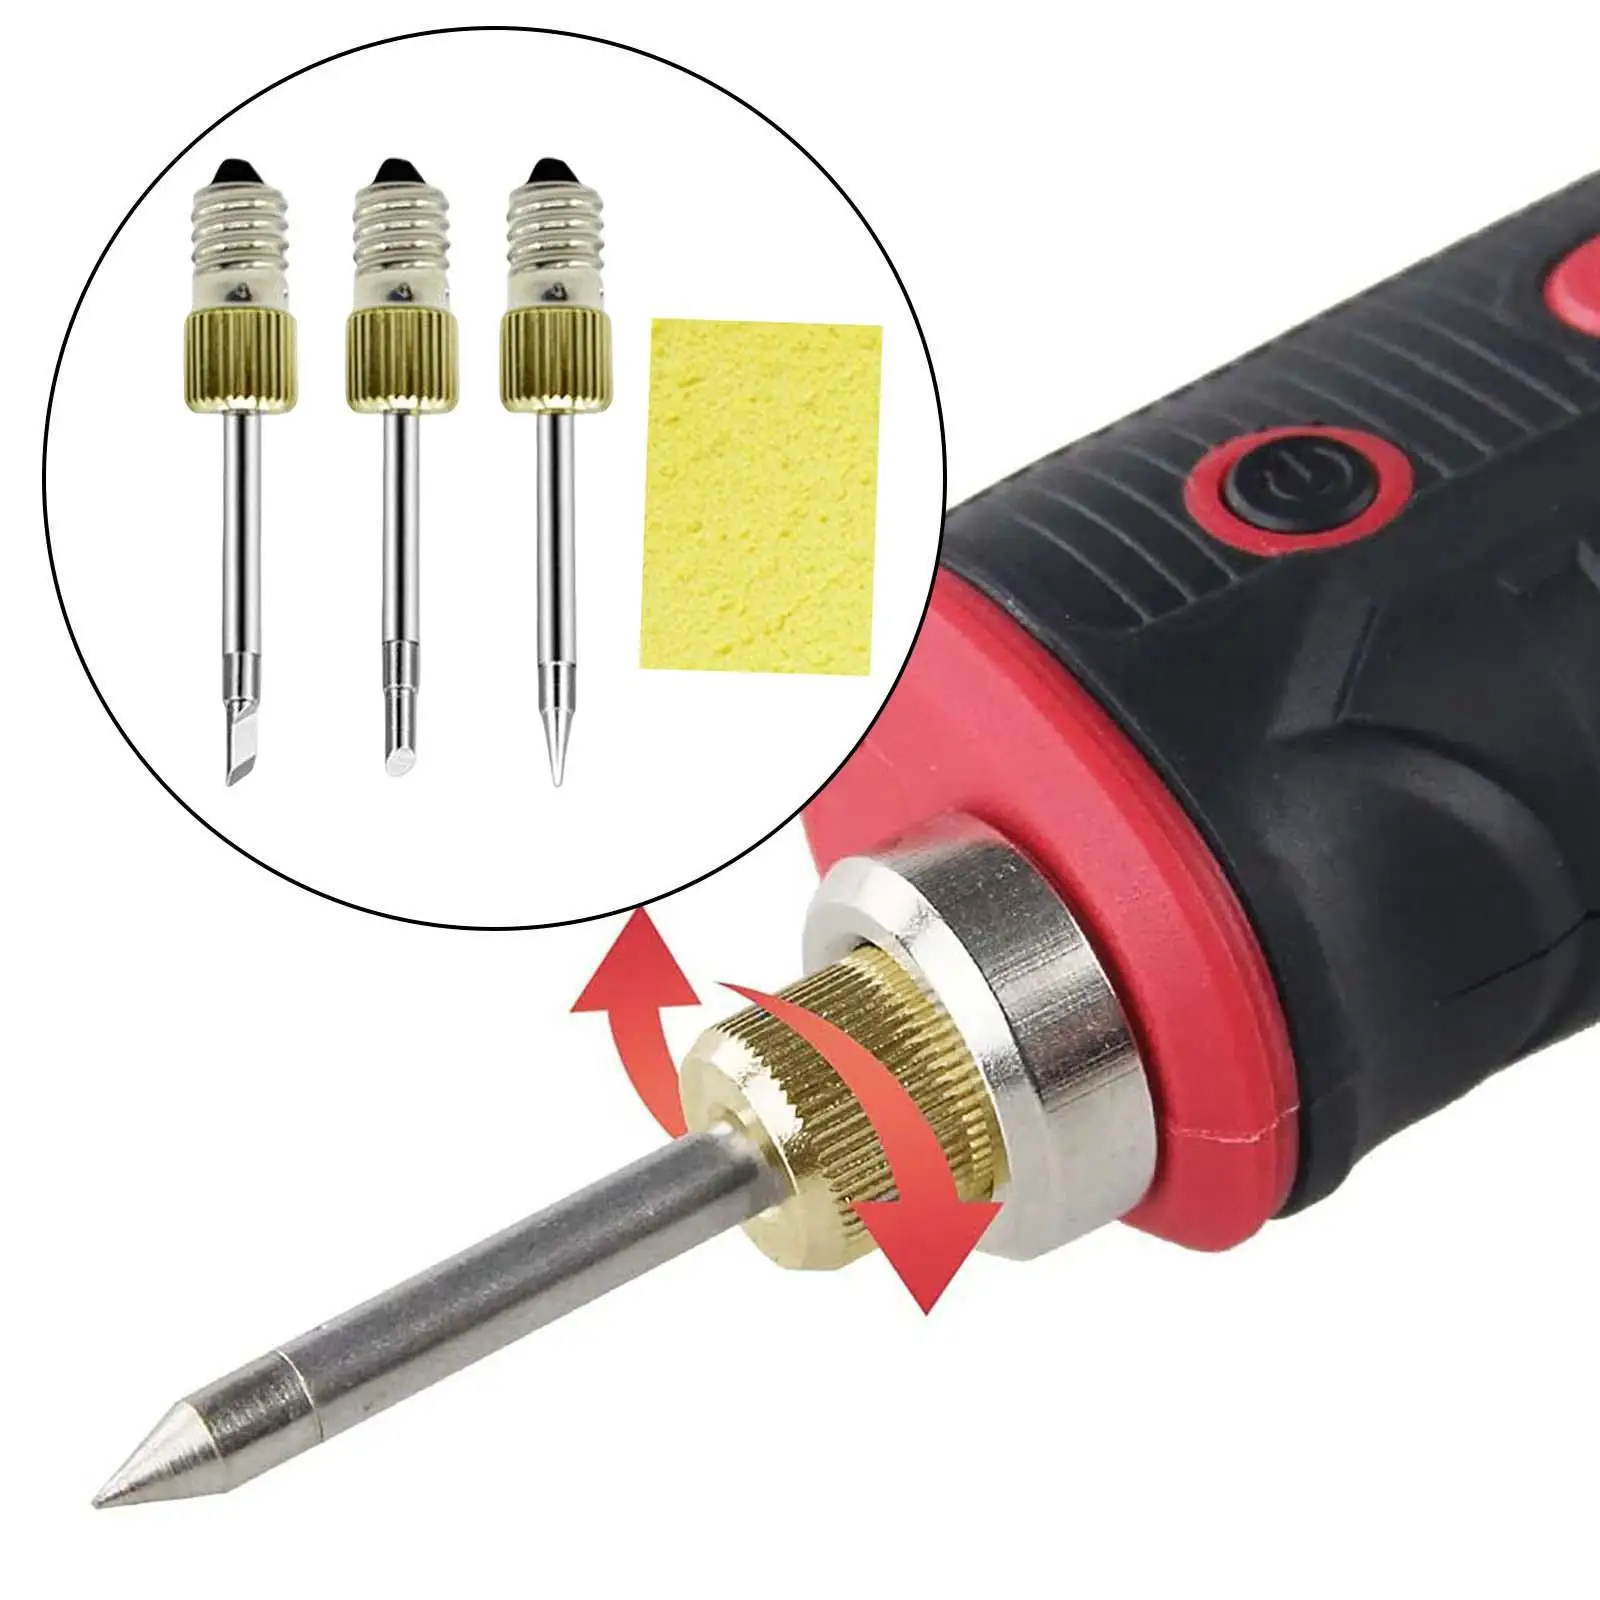 3x Soldering Iron Tips Durable Cordless Threaded Soldering Needle Tips Tools